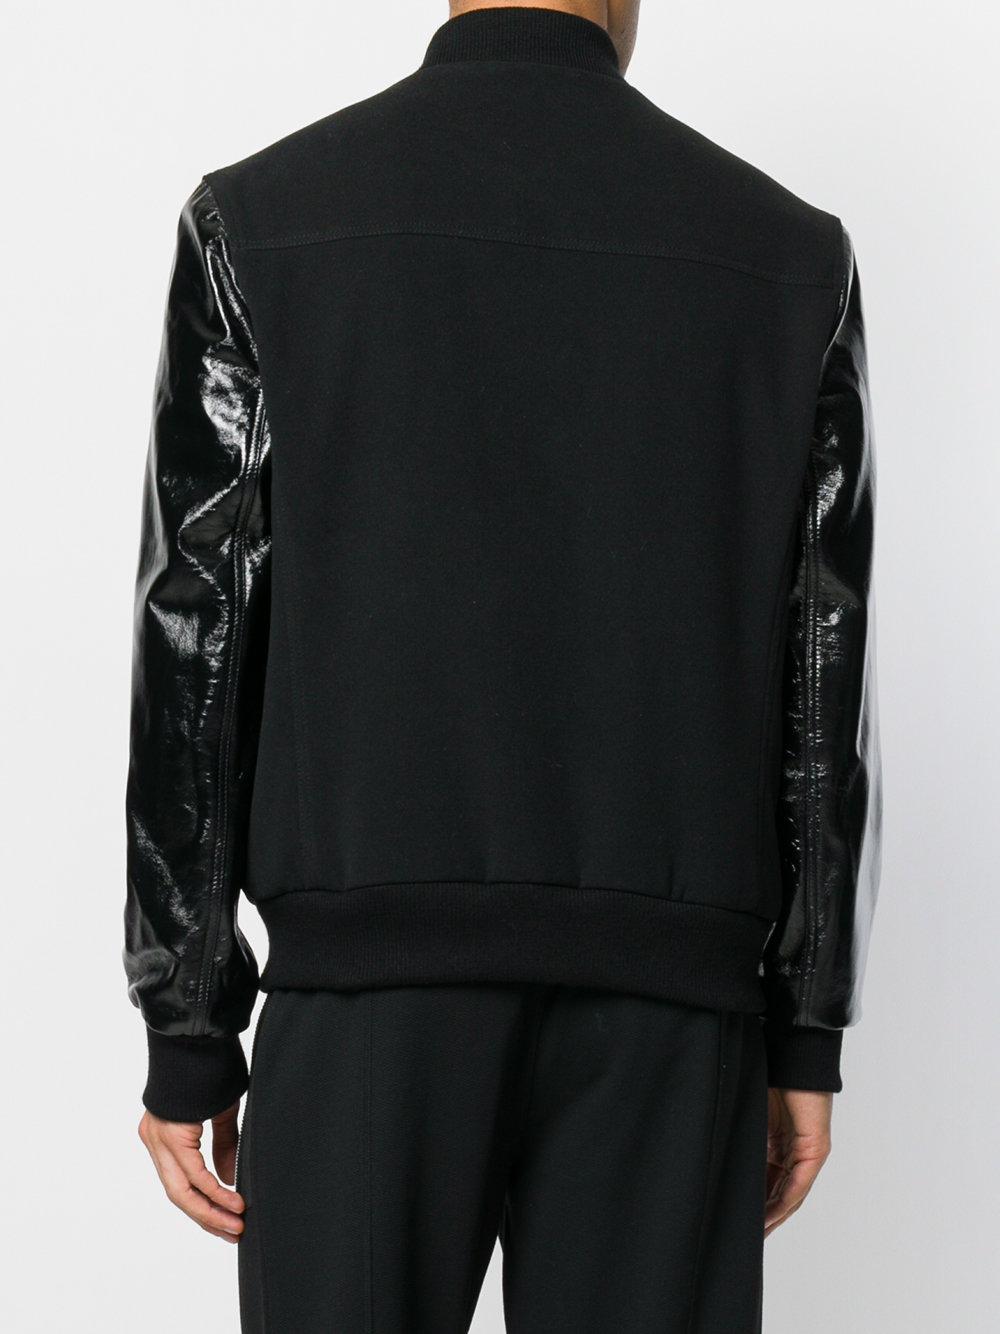 Blood Brother Leather Glitch Jacket in Black for Men - Lyst